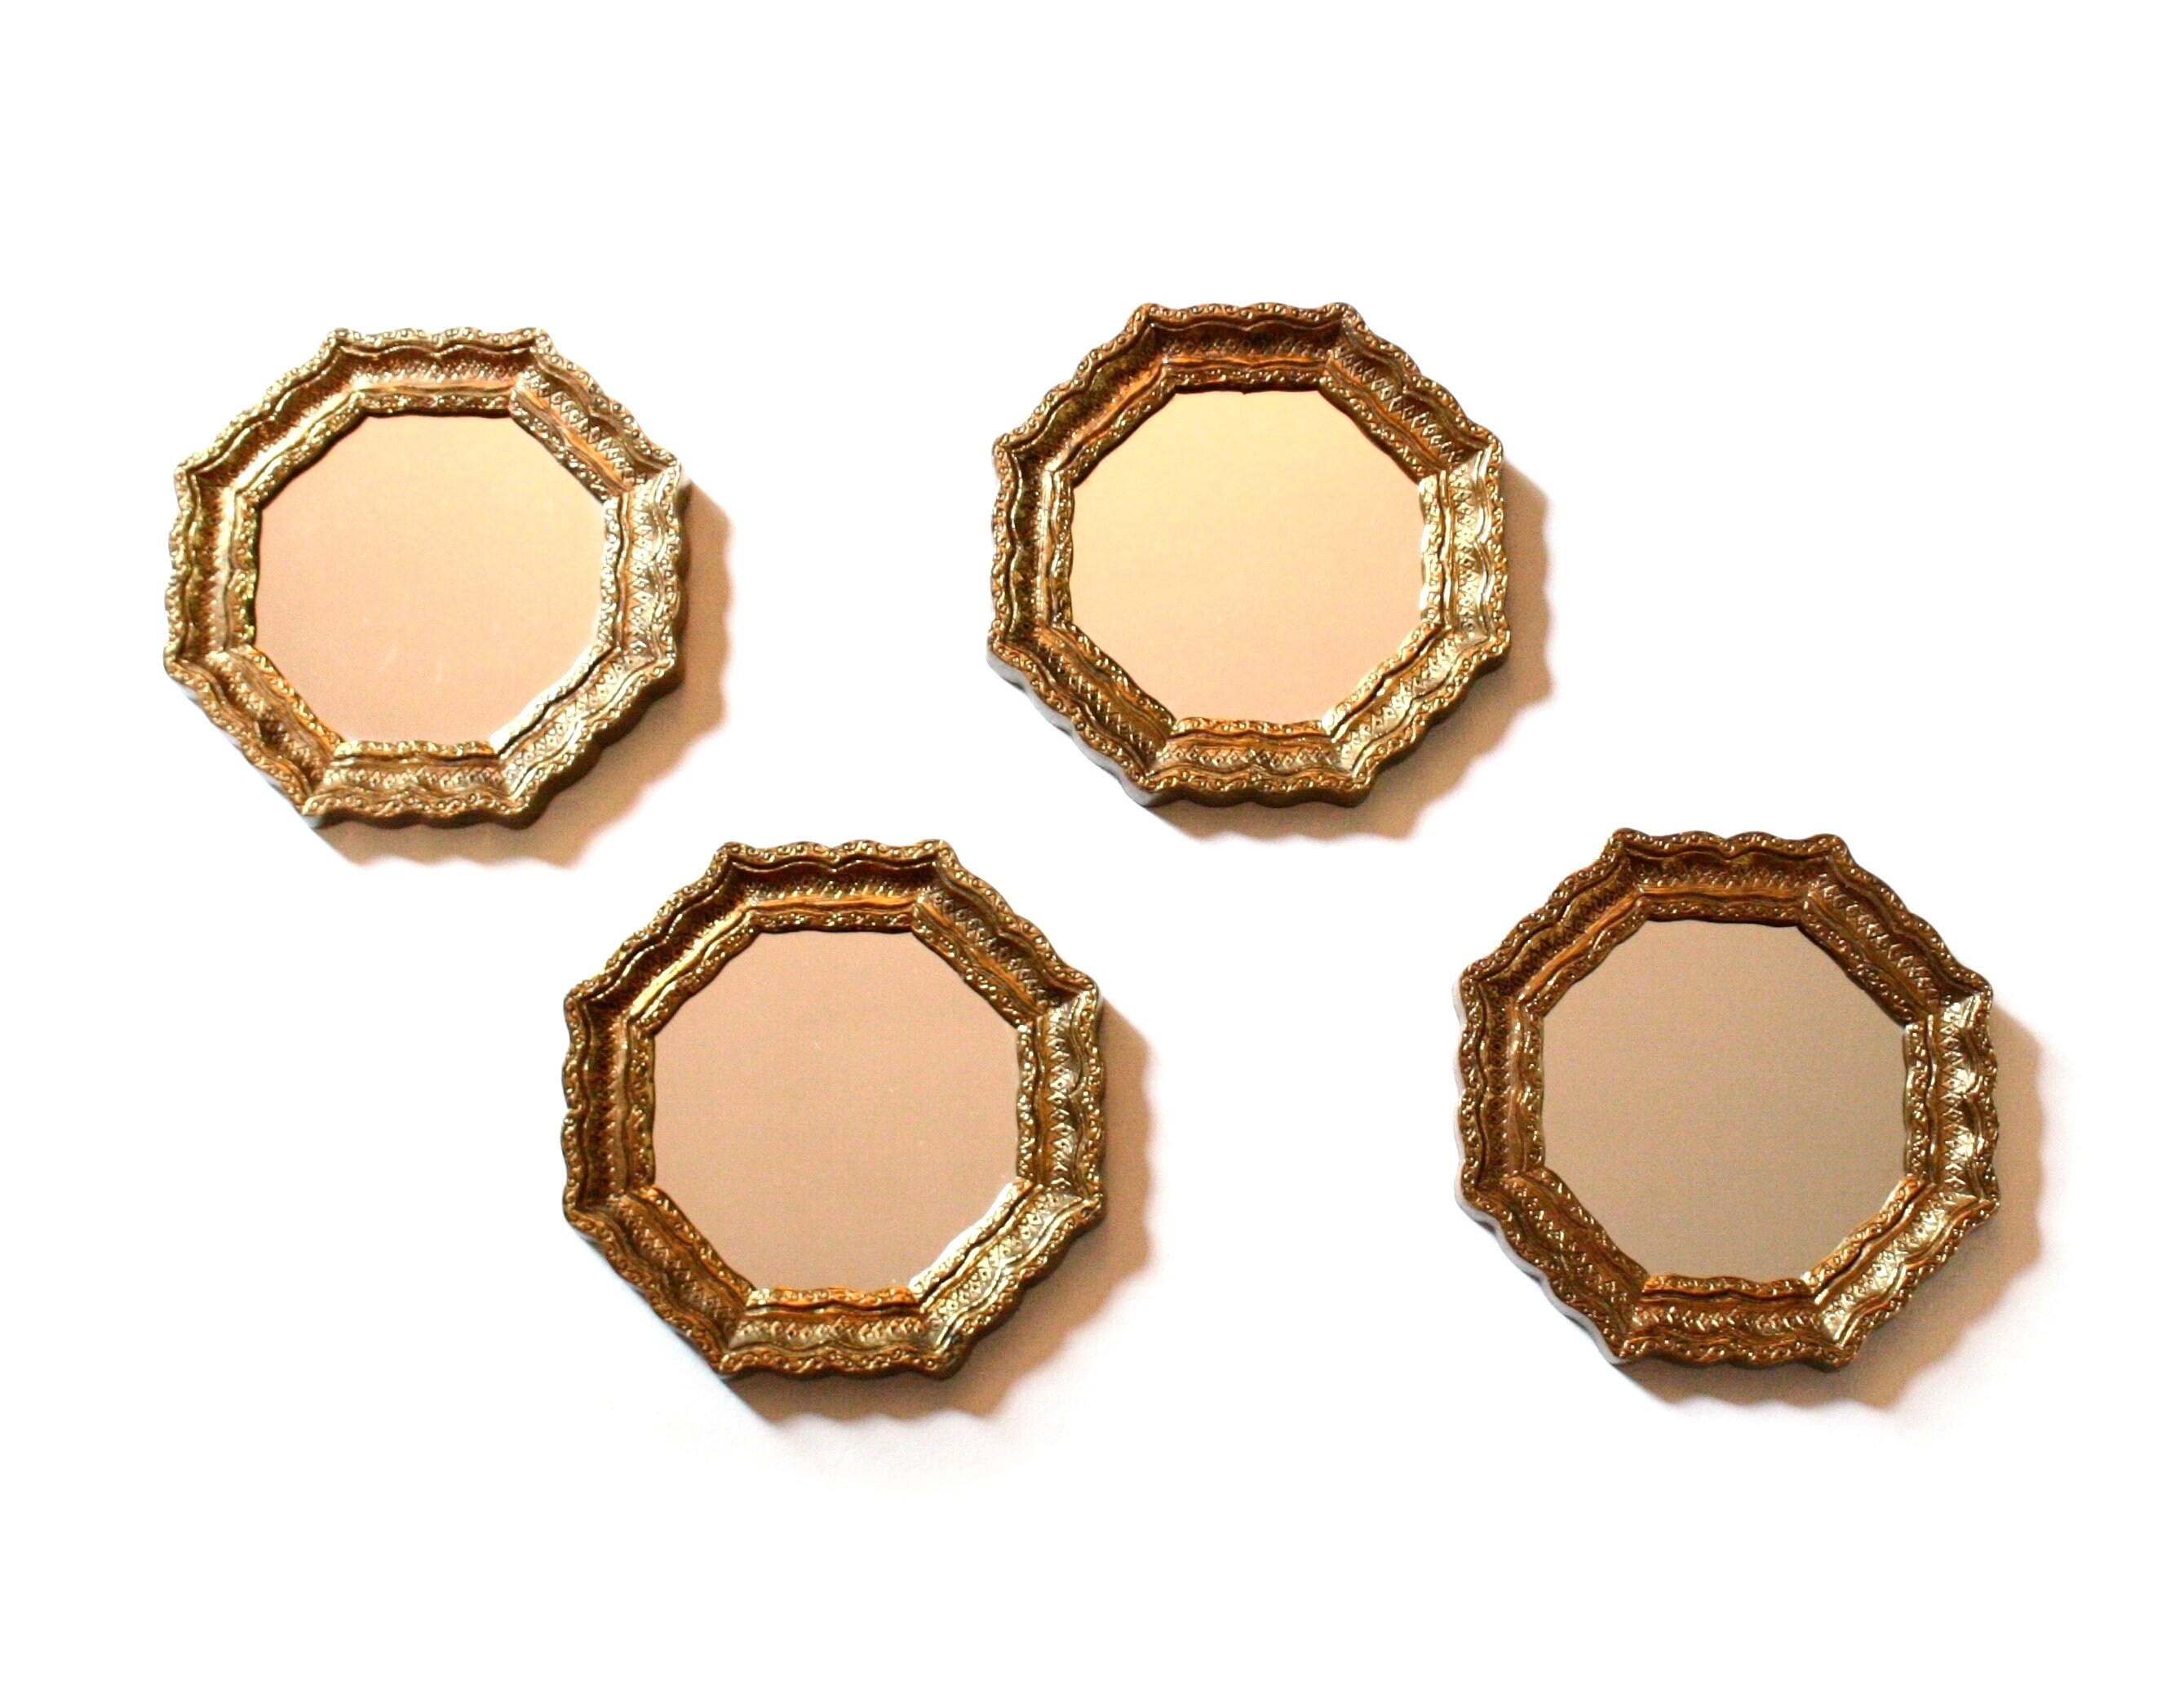 Small Gold Accent Wall Mirror Set of 3 Decorative Vintage Mirrors